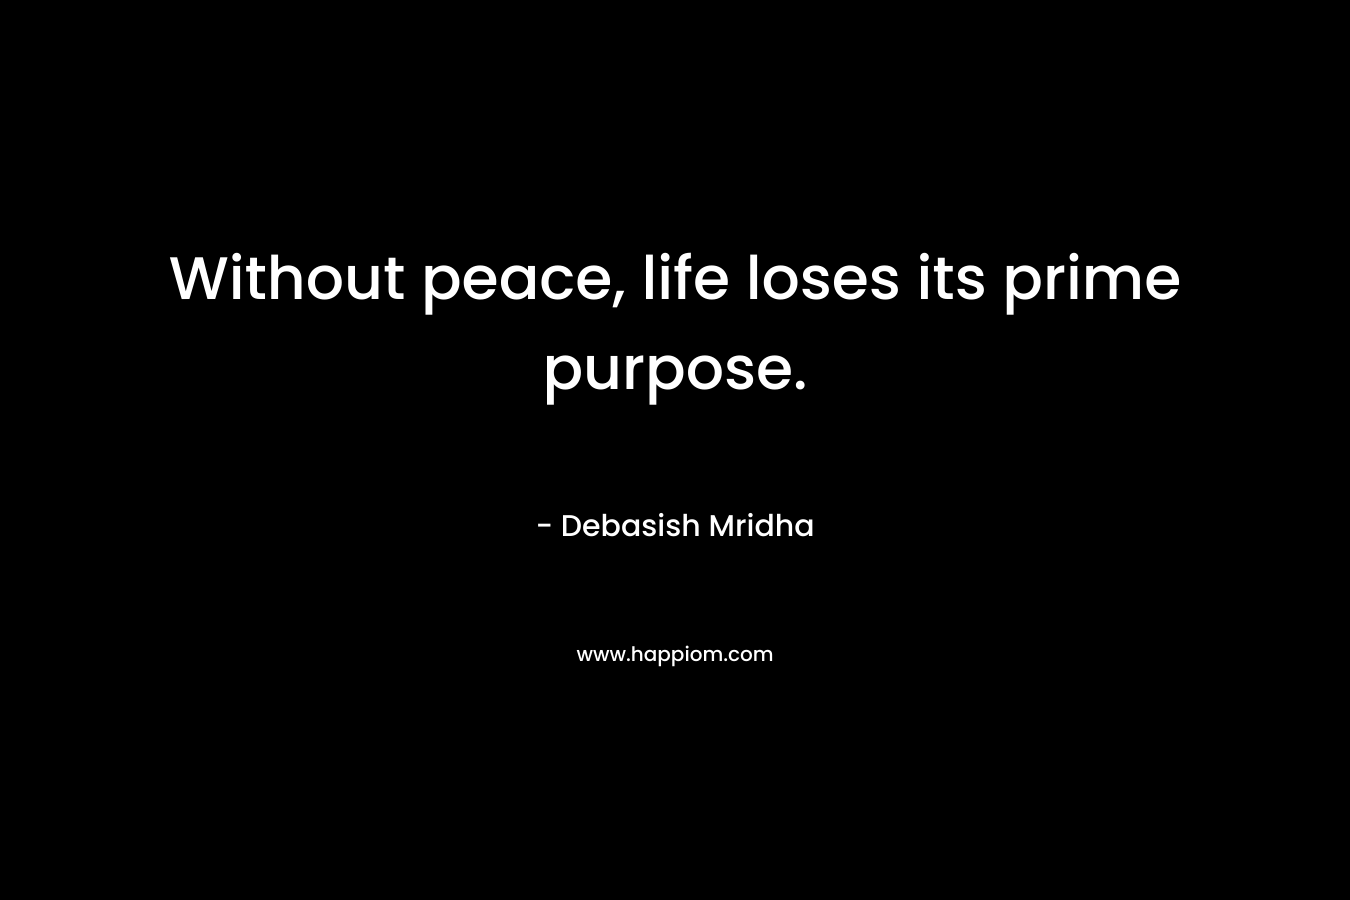 Without peace, life loses its prime purpose.